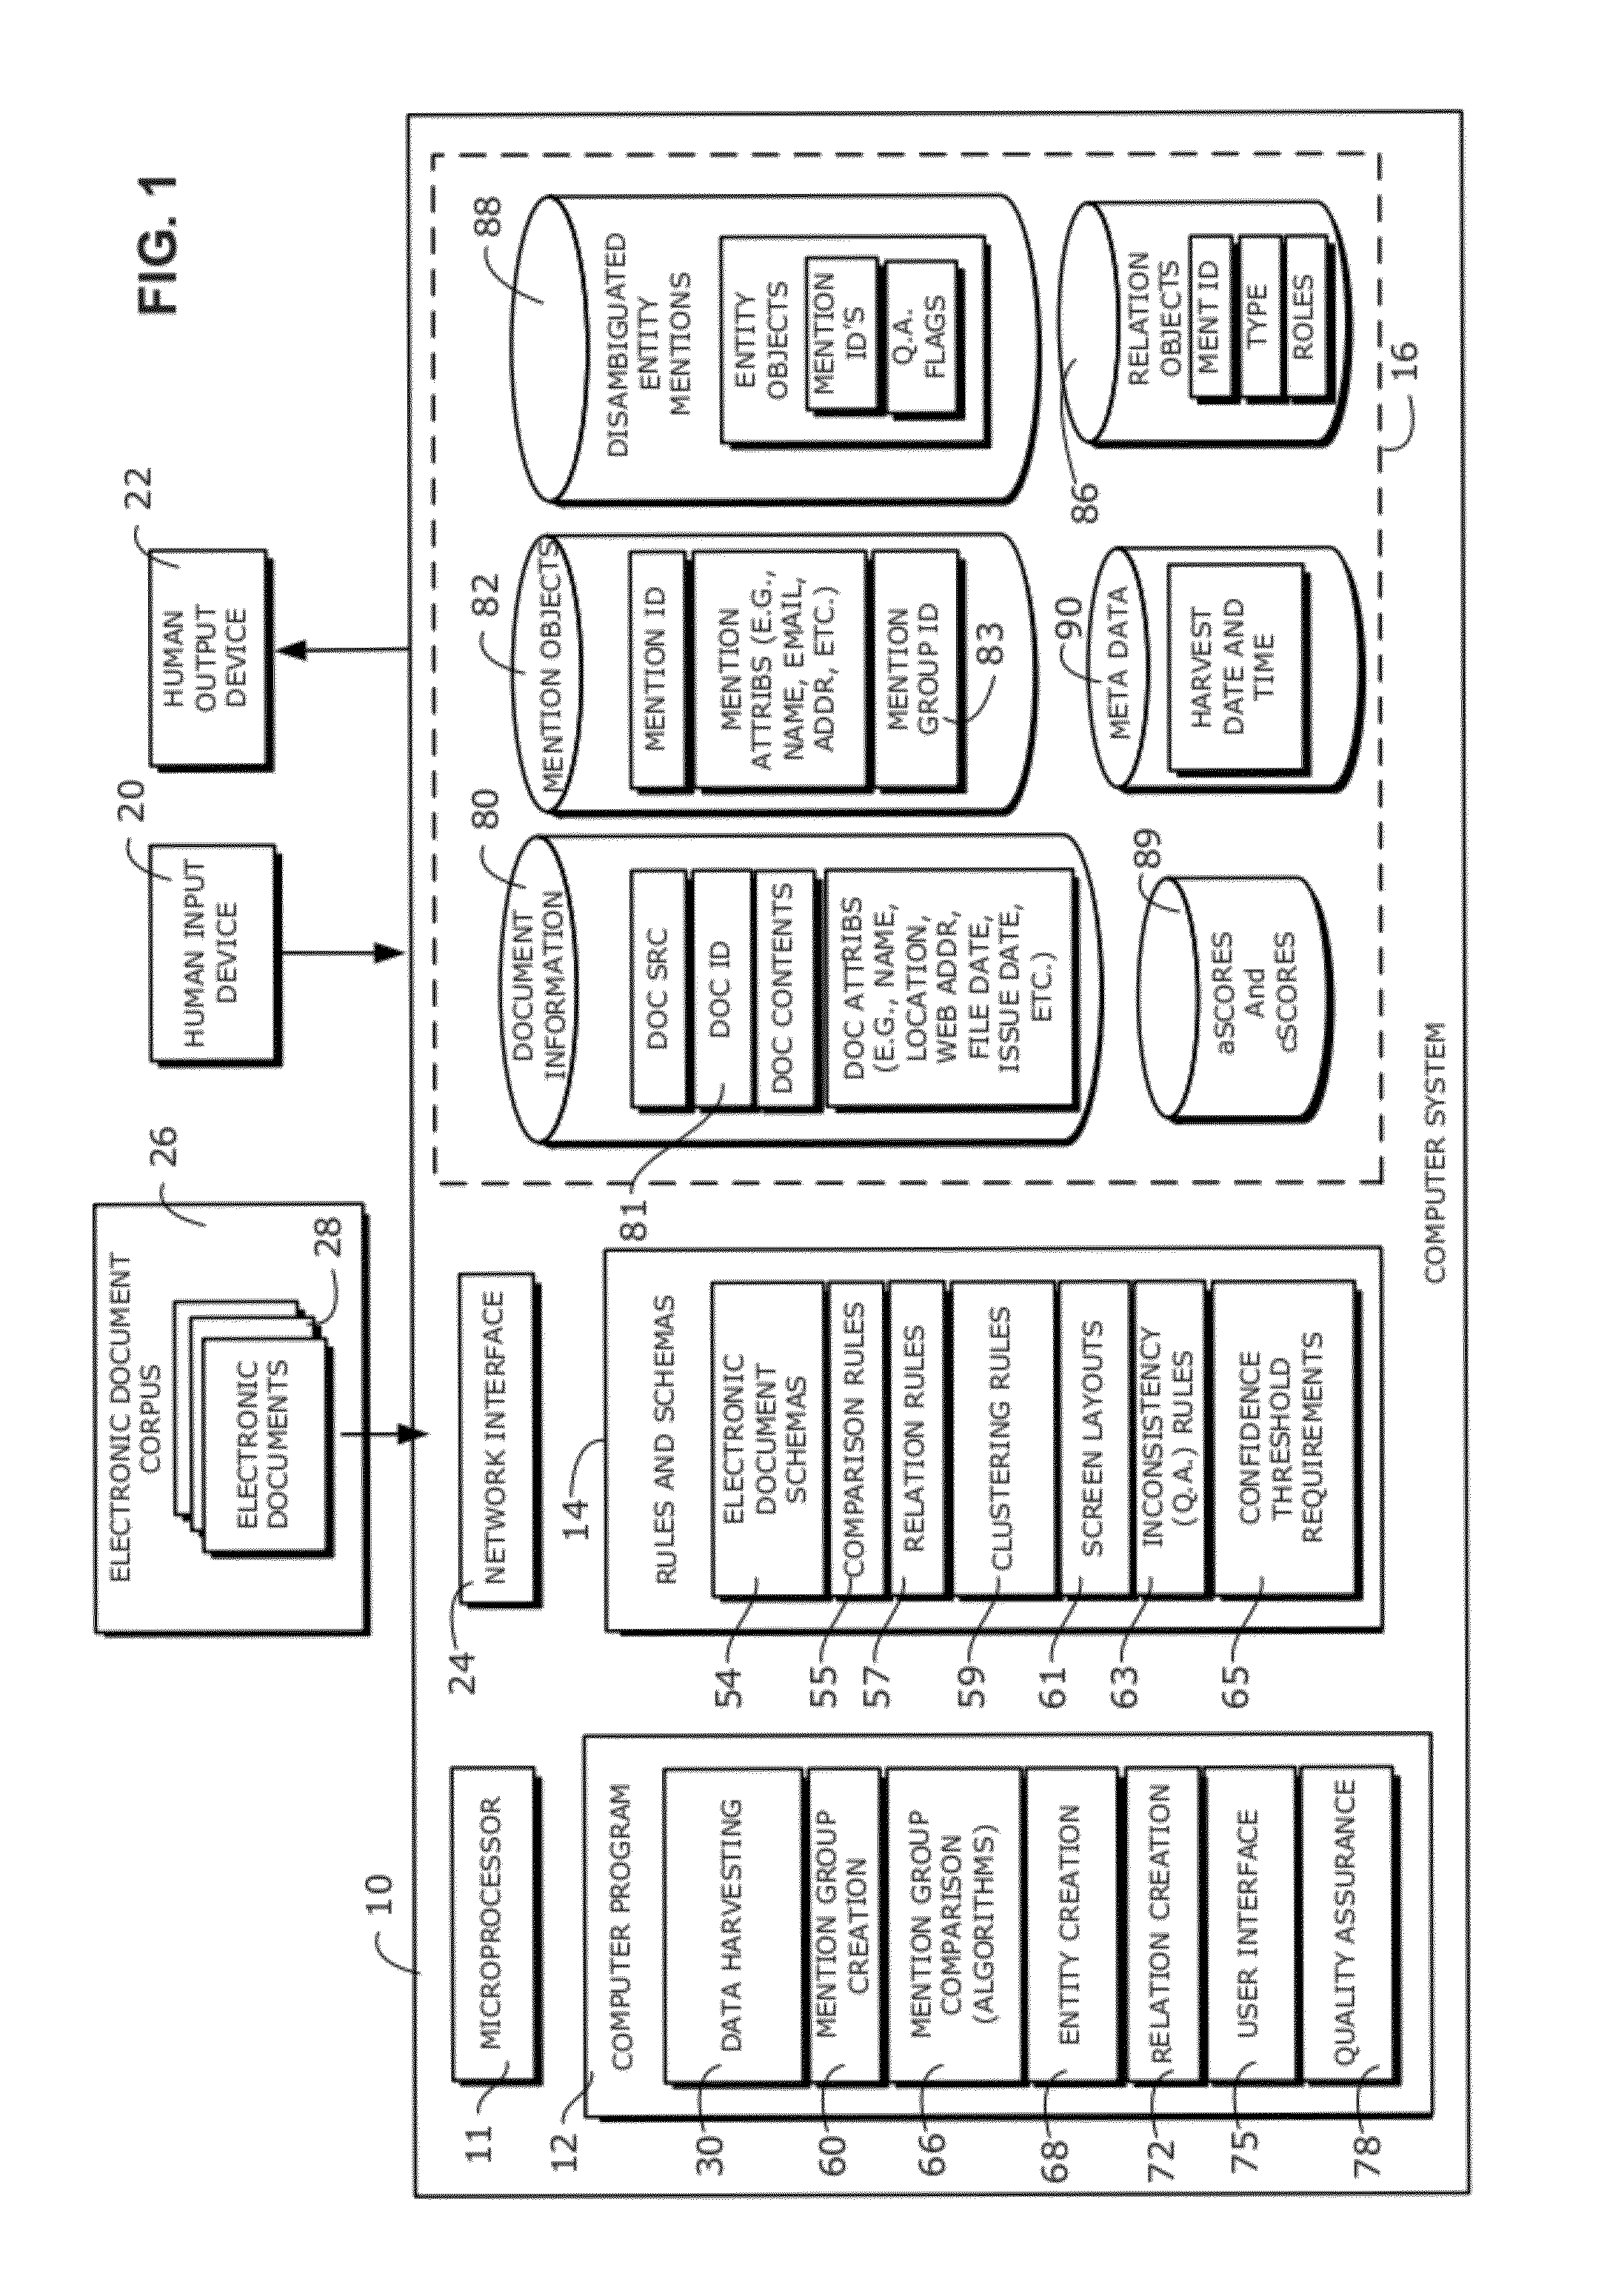 System and method for creating and maintaining a database of disambiguated entity mentions and relations from a corpus of electronic documents